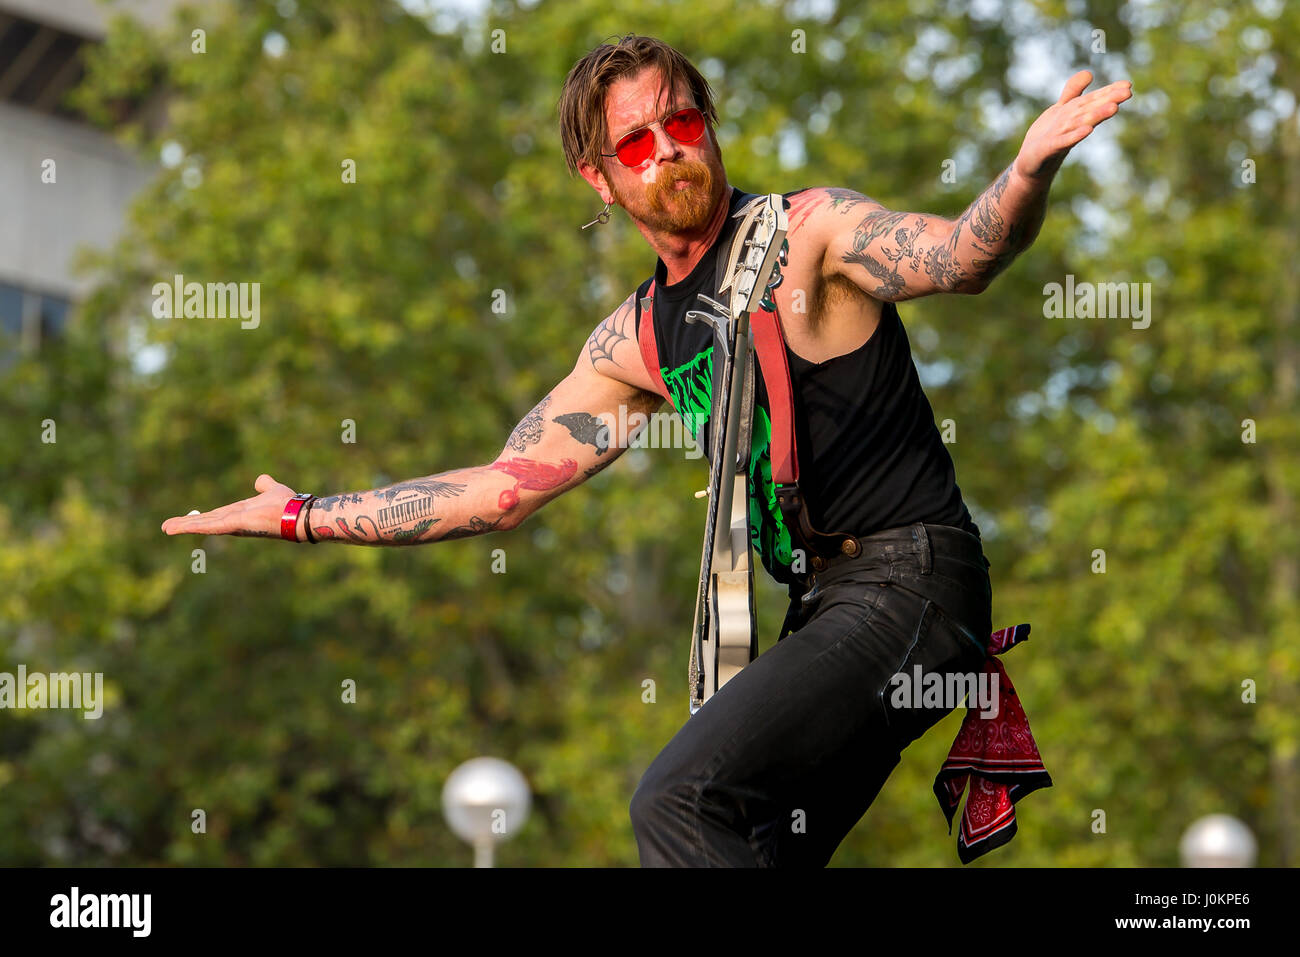 MADRID - SEP 10: Eagles of Death Metal (American rock band  founded by Jesse Hughes and Josh Homme) perform in concert at Dcode Music Festival on Sept Stock Photo